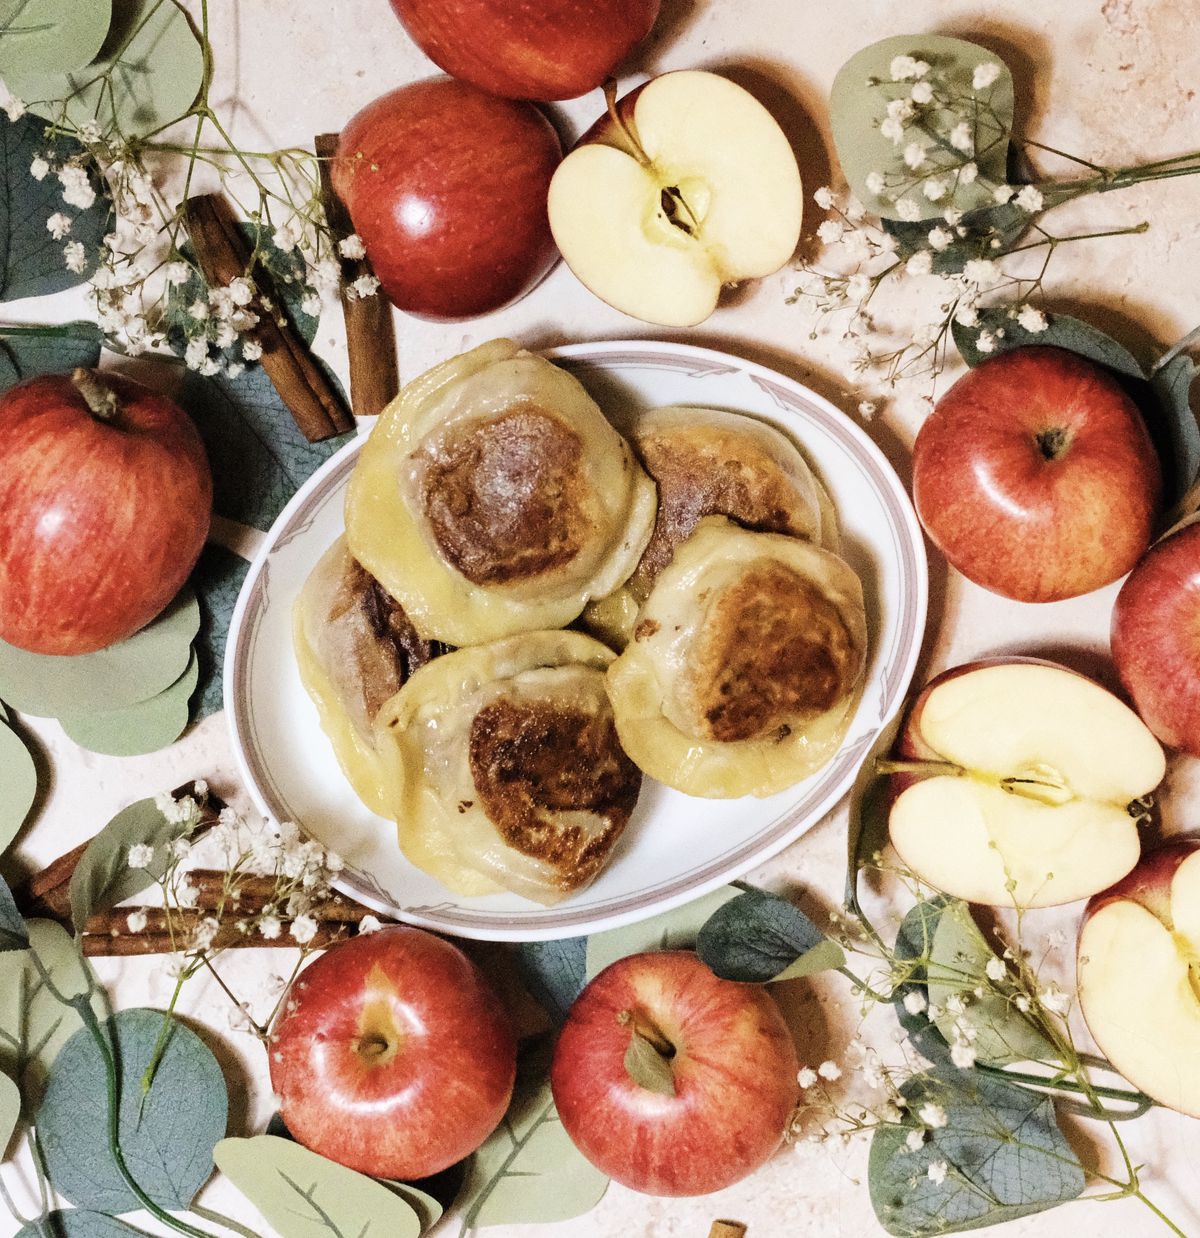 Five pierogi on a white oval plate, several whole and sliced red apples, and some foliage